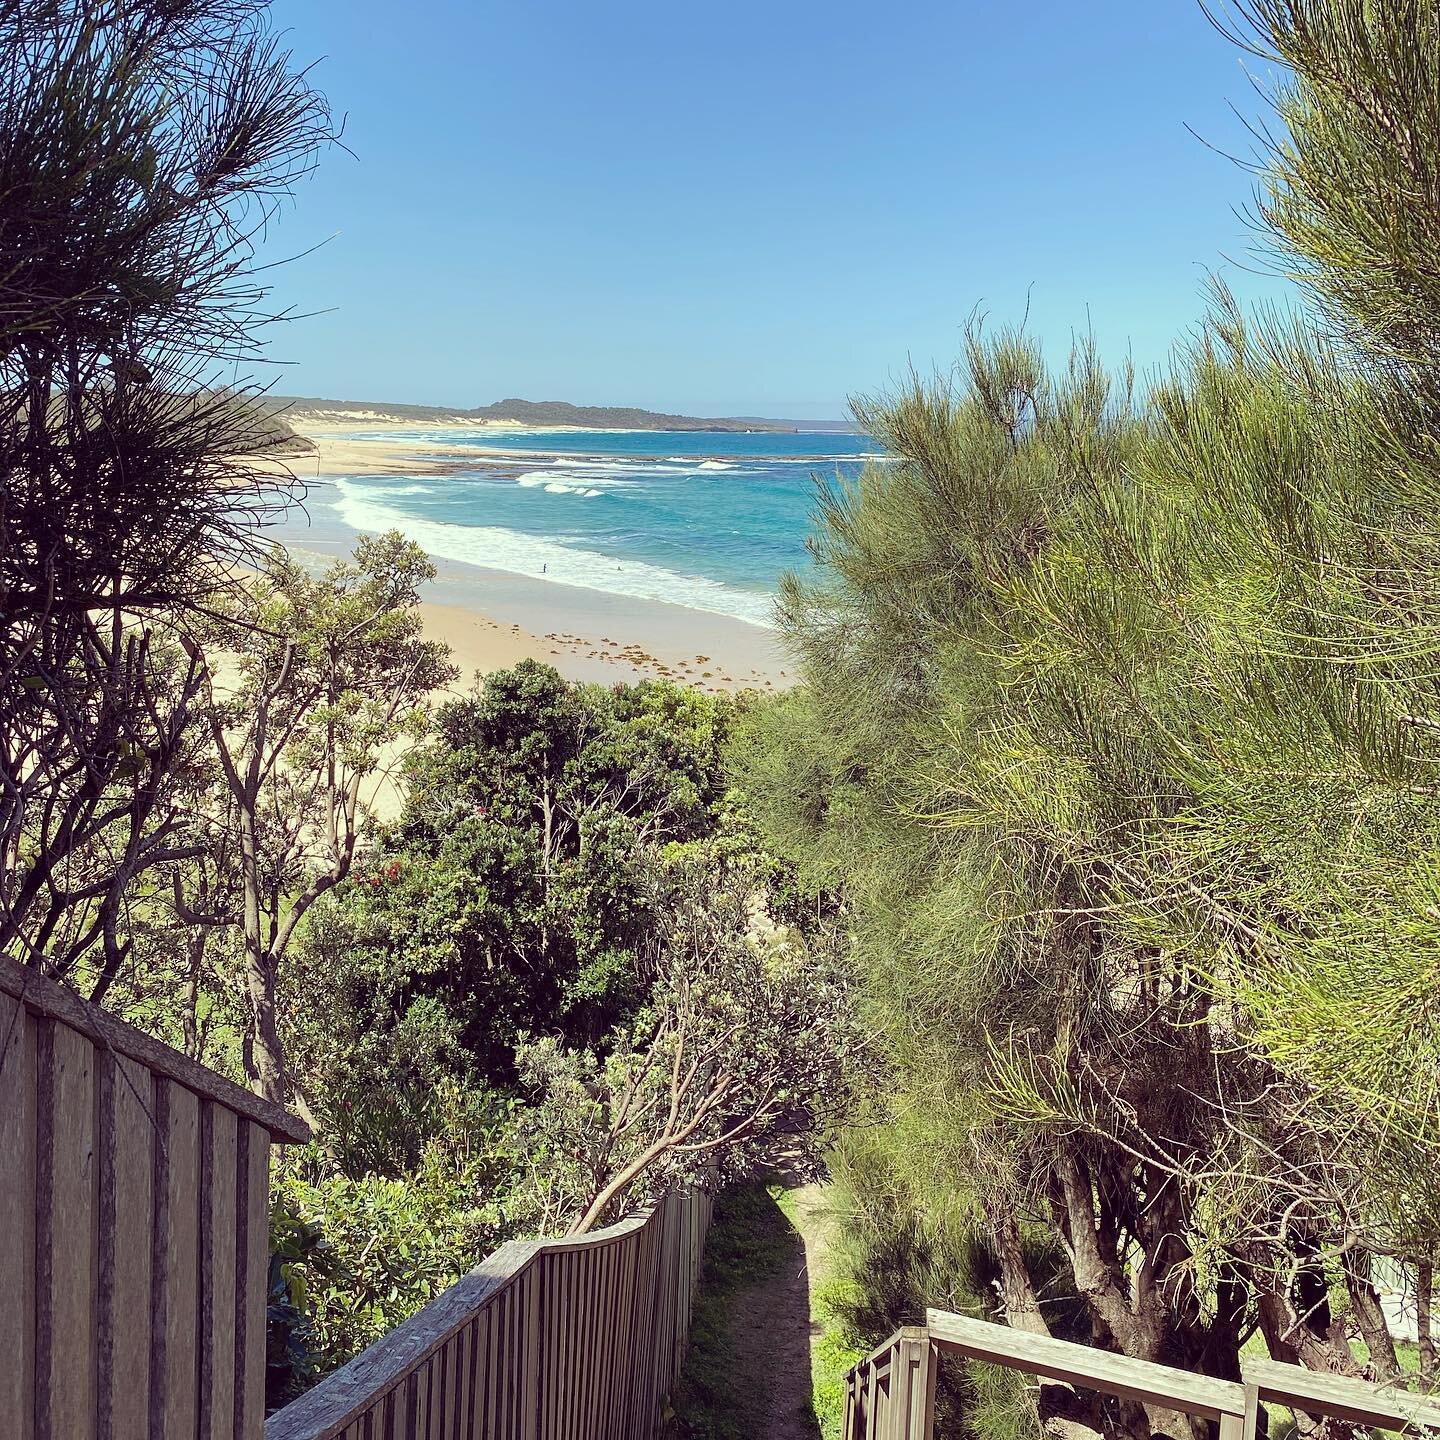 Summertime and the livin' is easy - Ella Fitzgerald #australia #beach #blue #coast #holidays #landscape #nature #ocean #sea #southcoast #stairs #summer #trees #vacation #water #waves